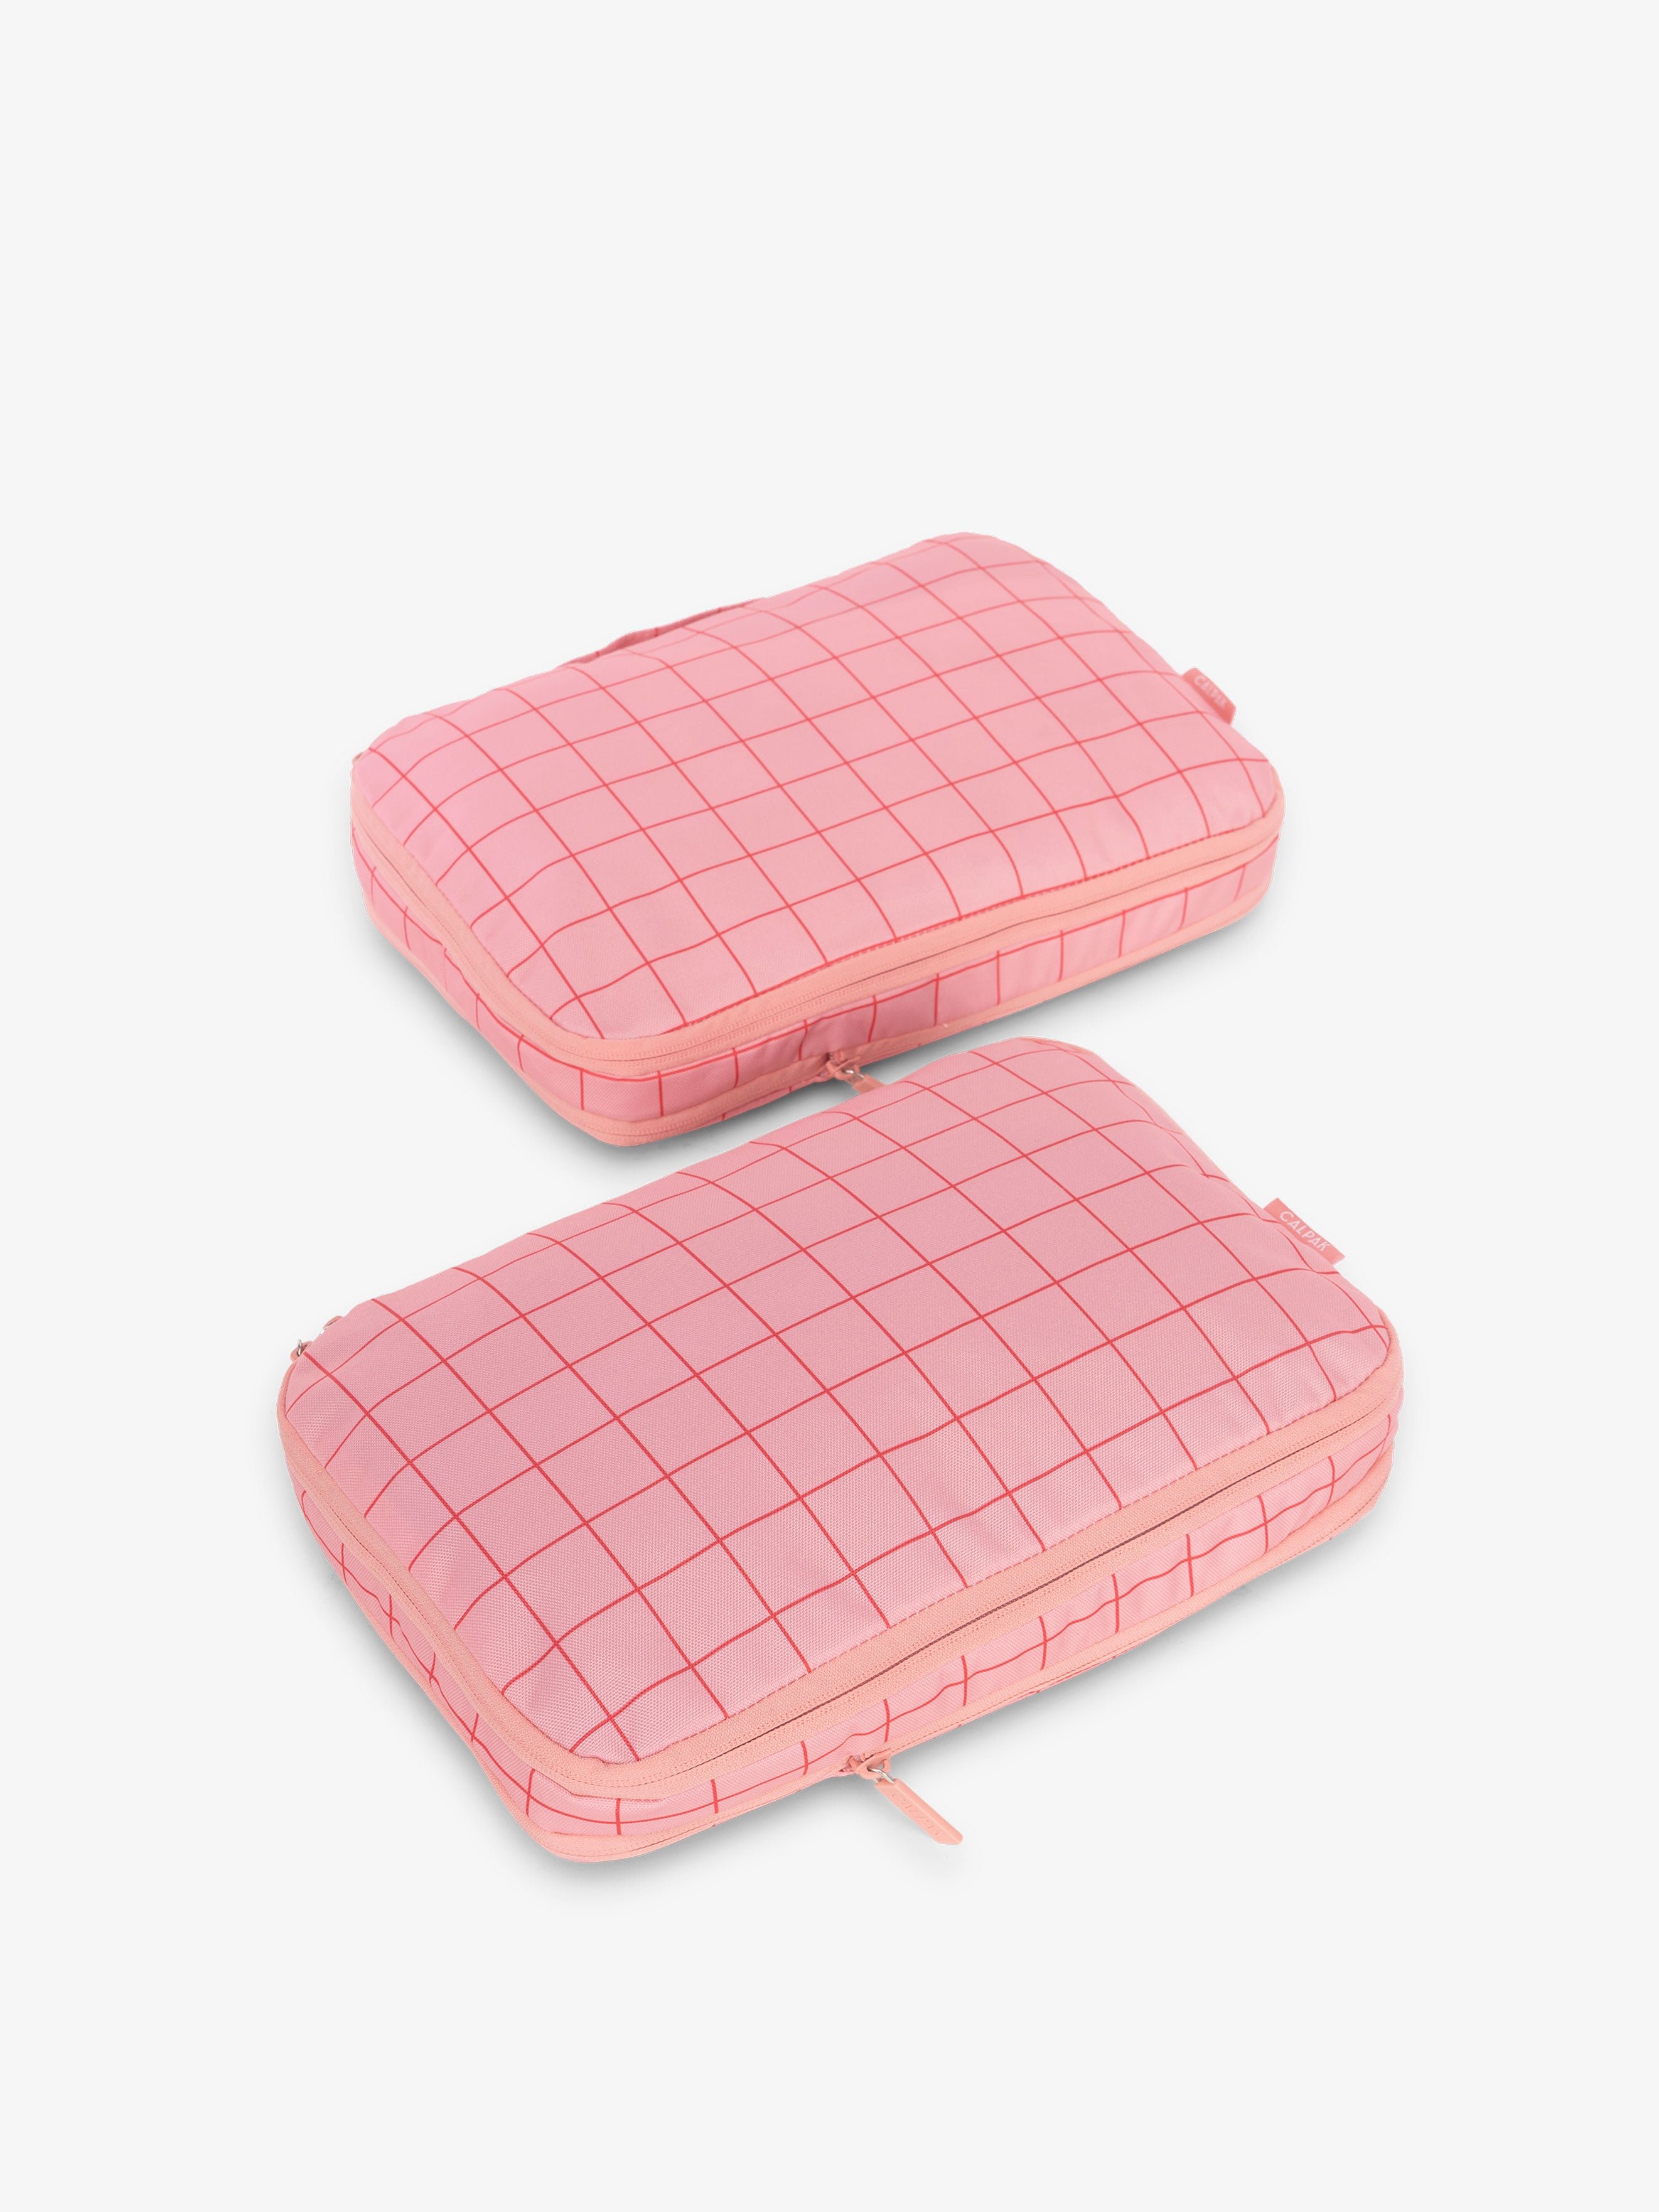 CALPAK compression packing cubes in pink grid